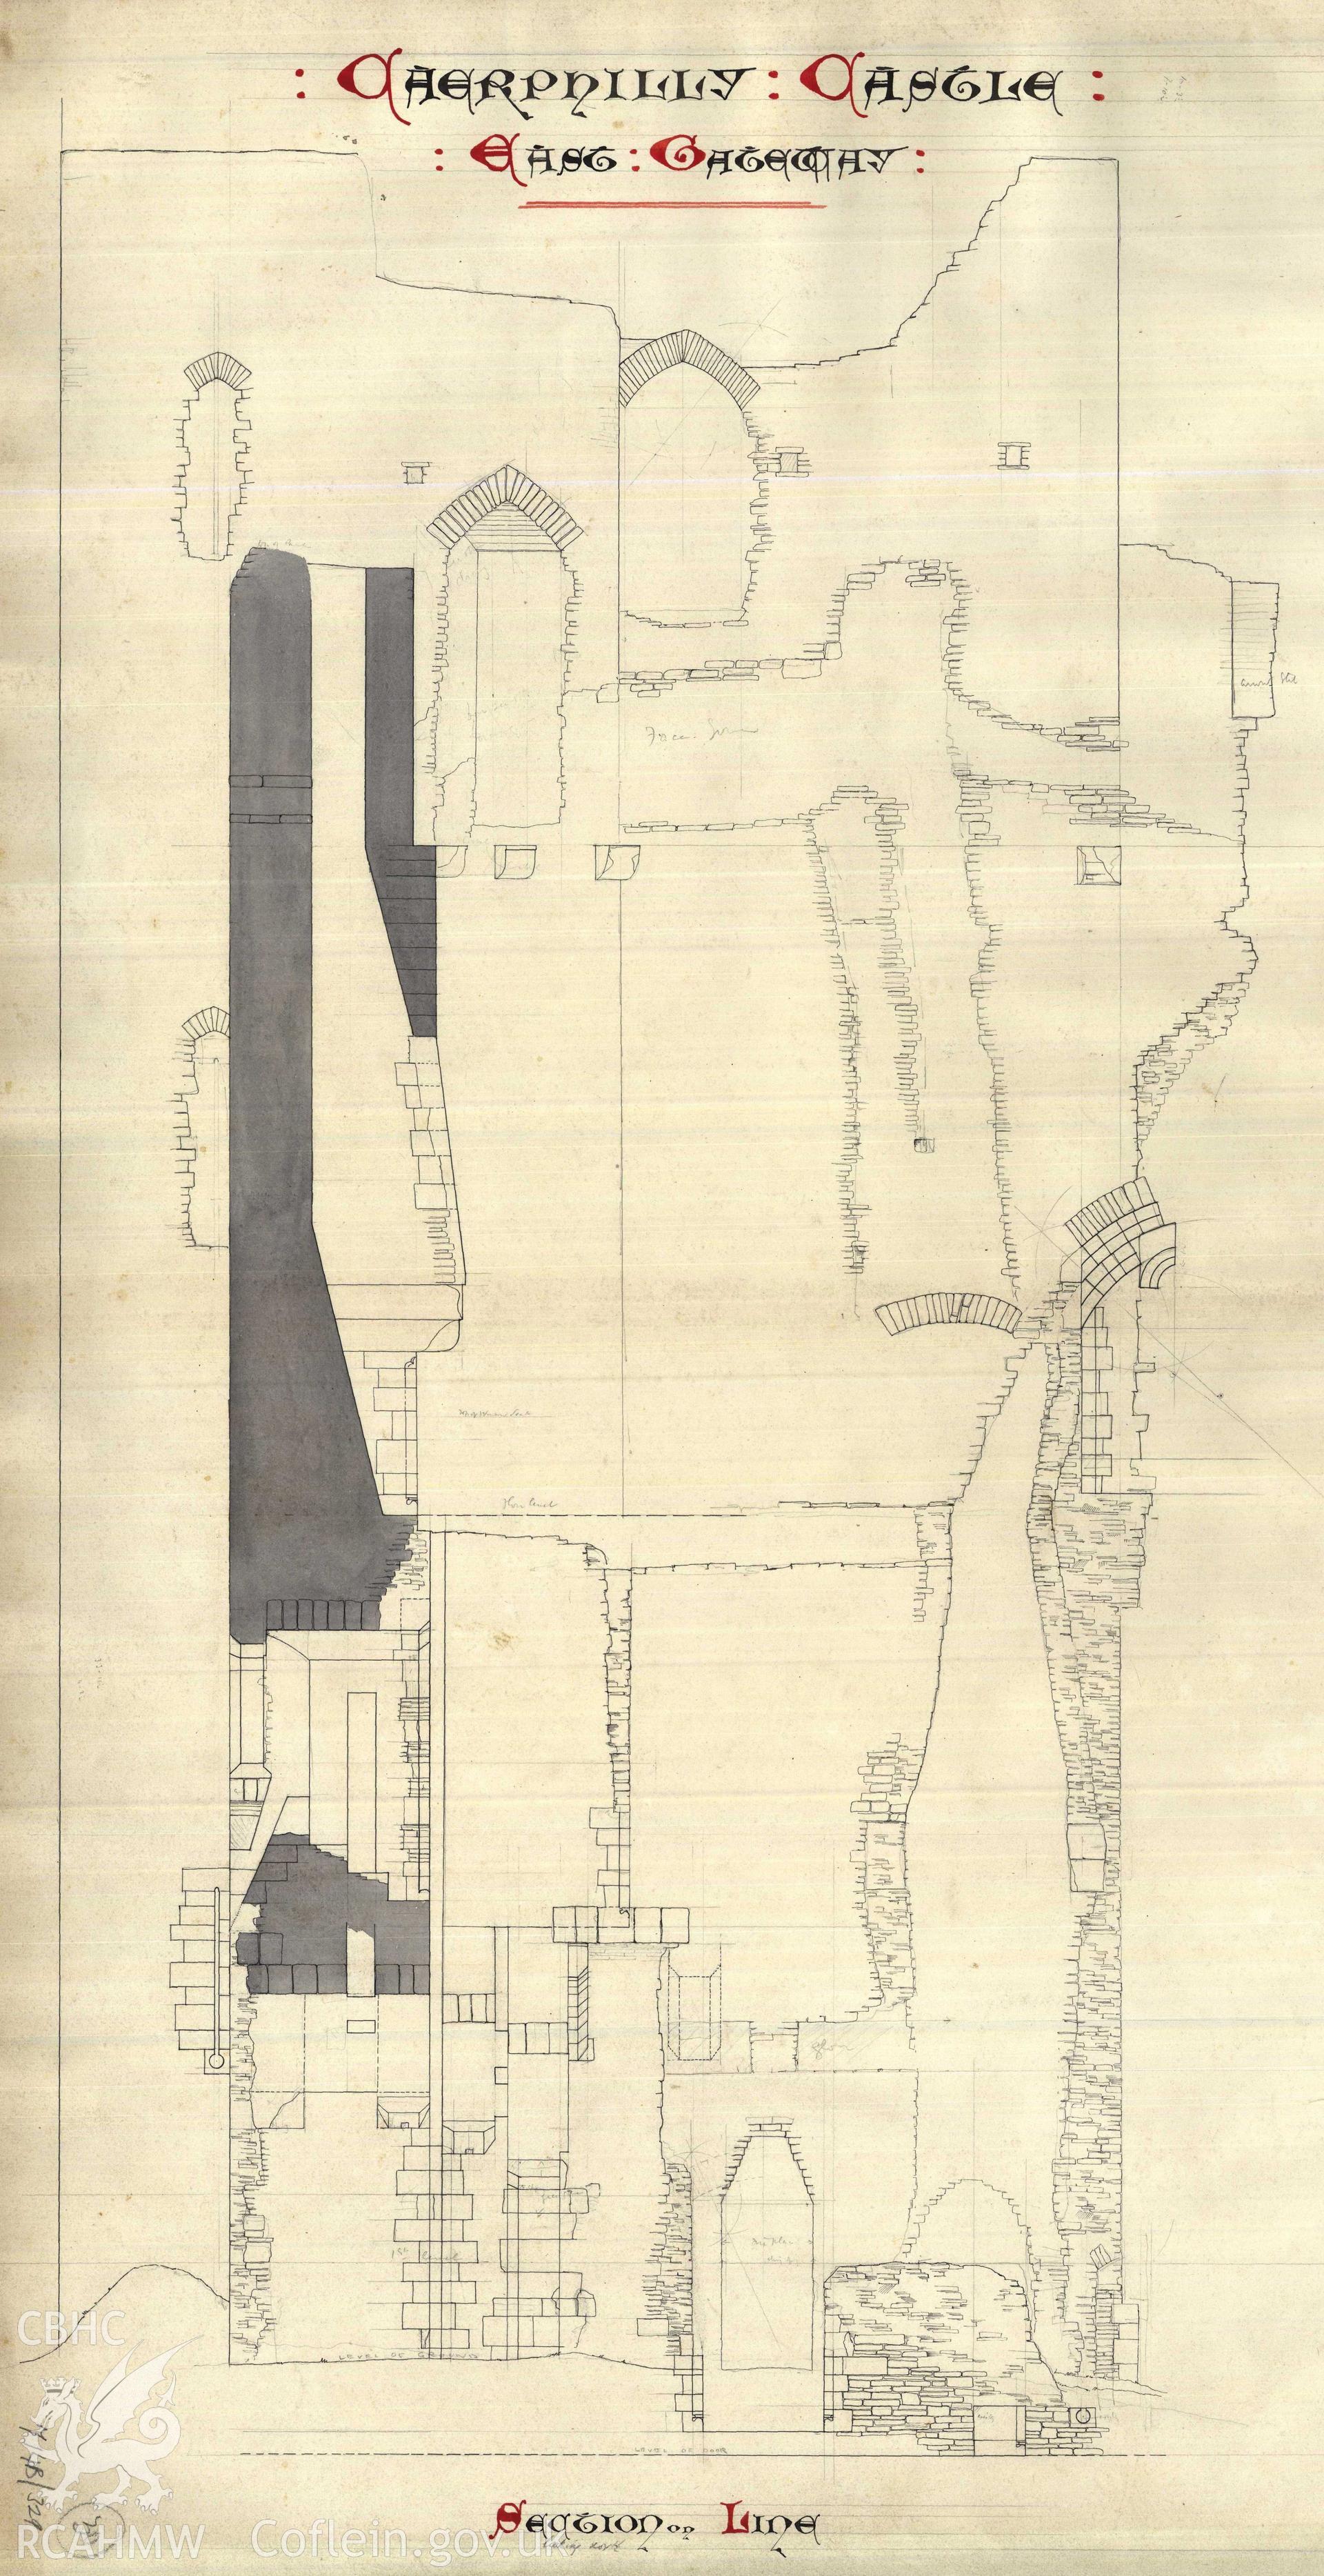 Cadw guardianship monument drawing of Caerphilly Castle. Section, East gateway. Cadw Ref. No. 714B/329. No scale.